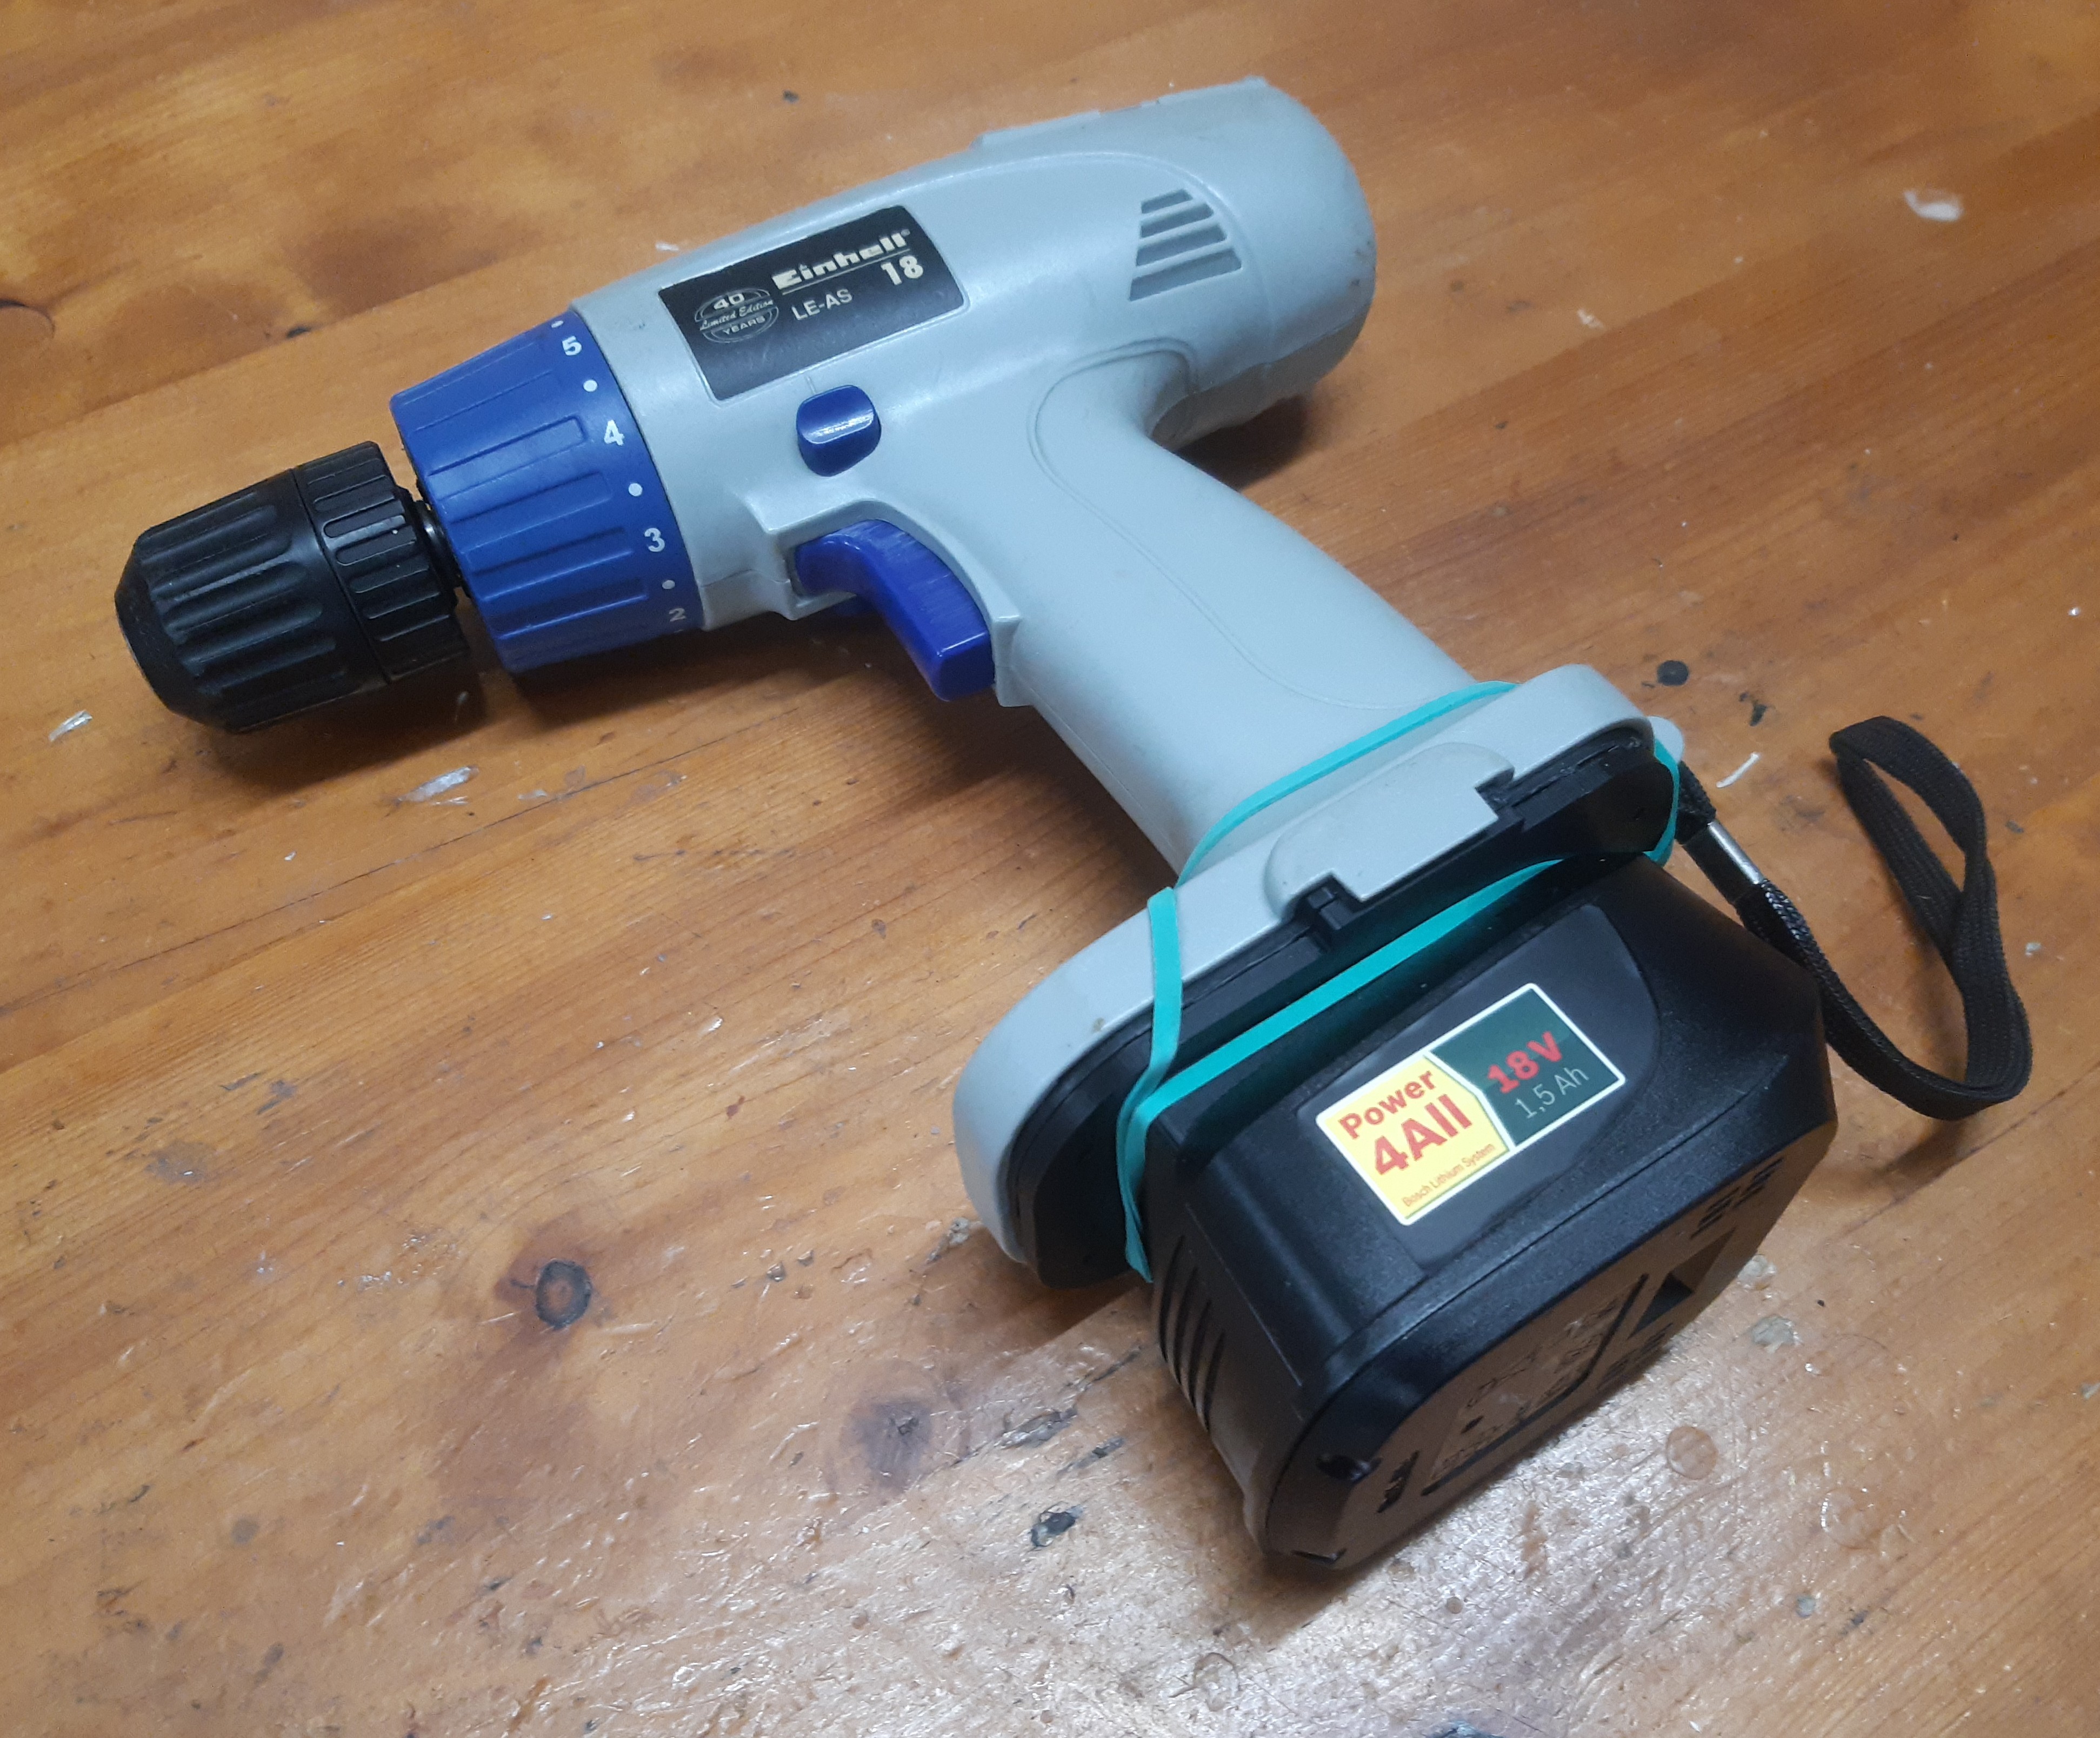 Adapter: Bosch Power4All batteries to Einhell 18-V drill by Joerg_H, Download free STL model